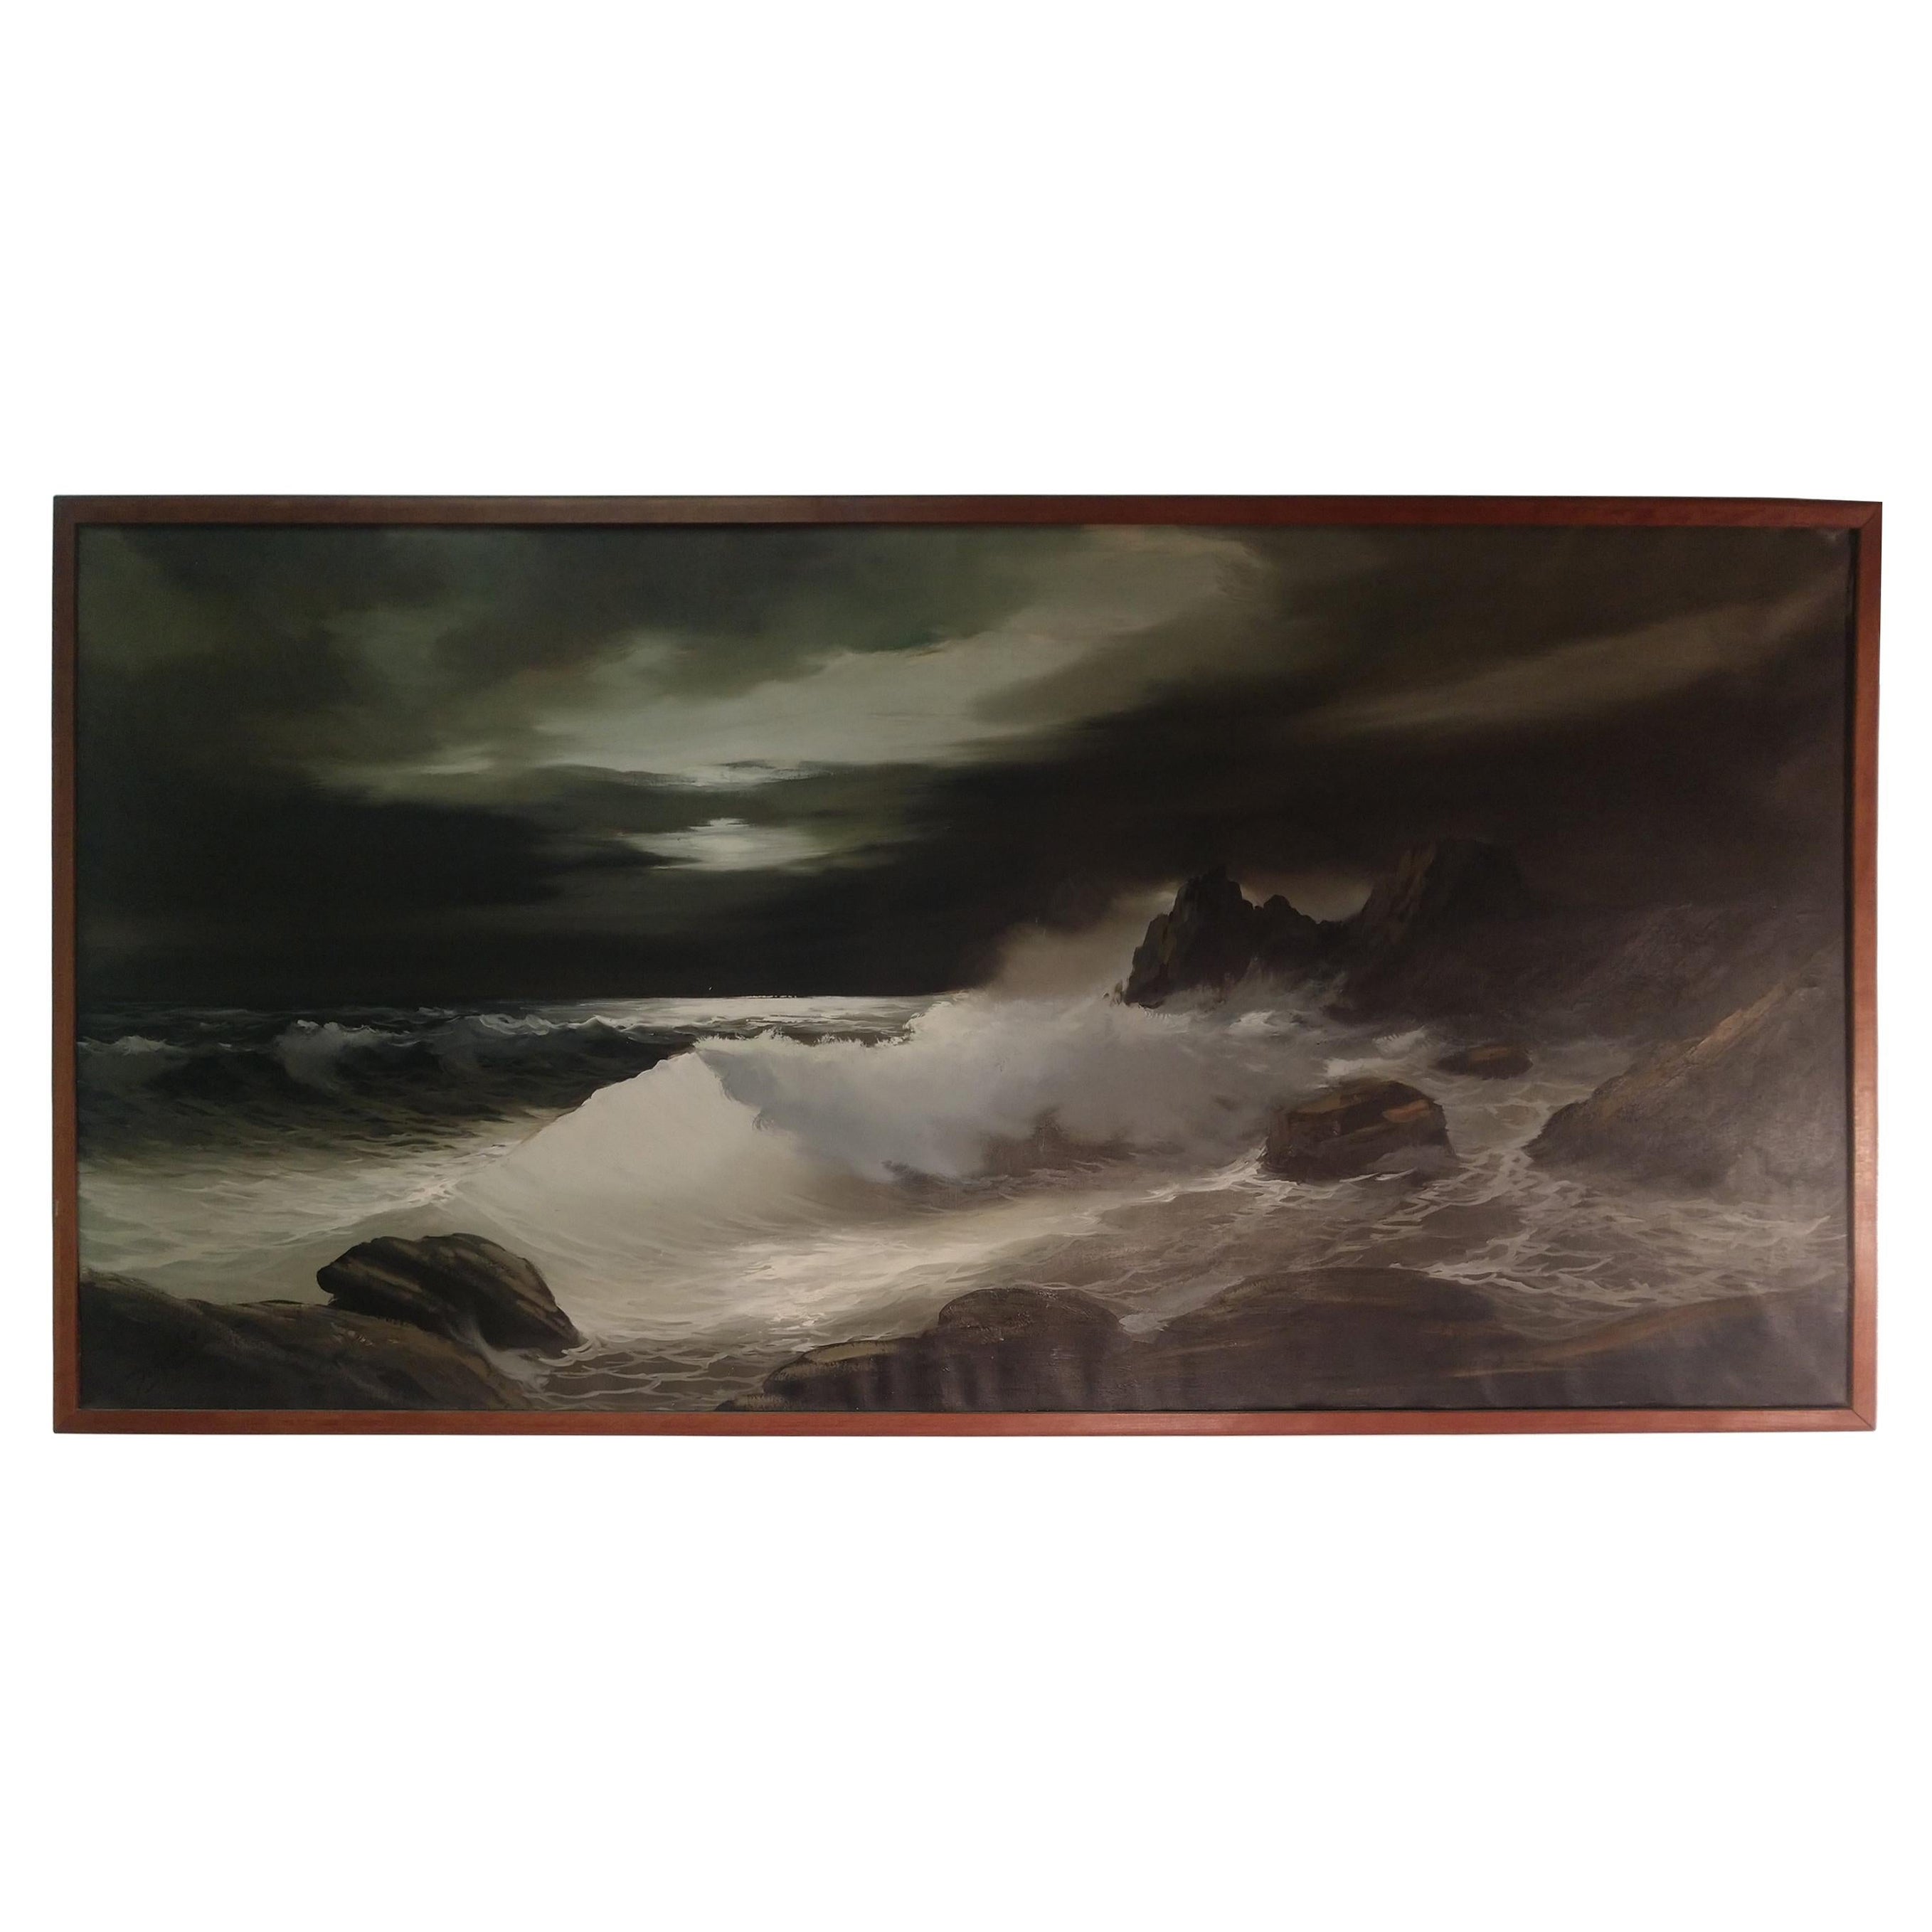 Night Ocean Scene with Waves Crashing by Artist Bruno Di Giulio For Sale